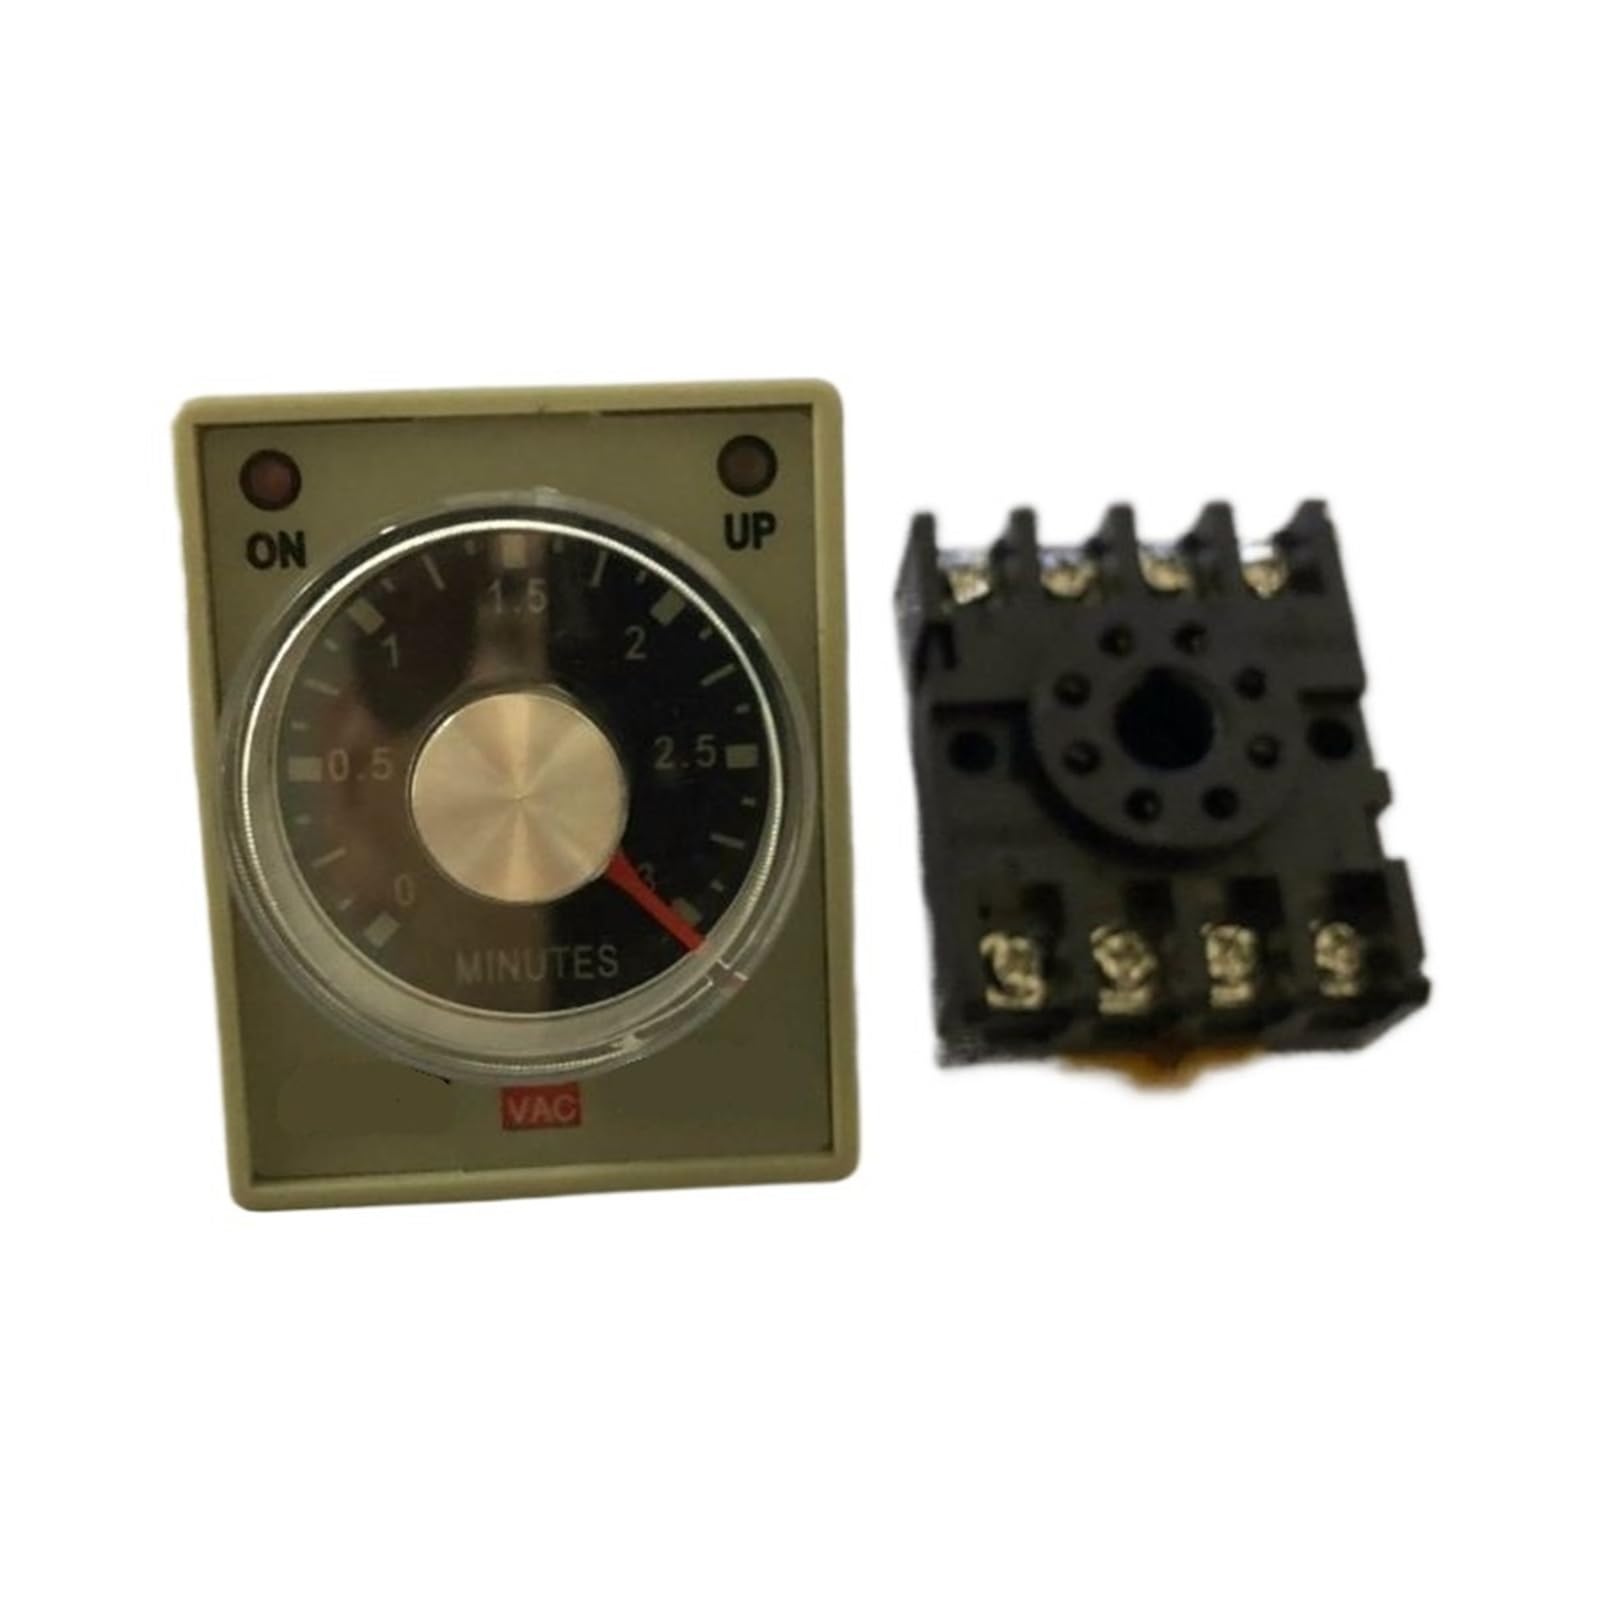 AH3-3 Time relay DC12V DC24V AC110V AC220V Delay Timer Time Relay with base 8Pin 1S 3S 6S 10S 30S 60S 6M 10M BIANMTSW(Minute-3,AC220V) von BIANMTSW